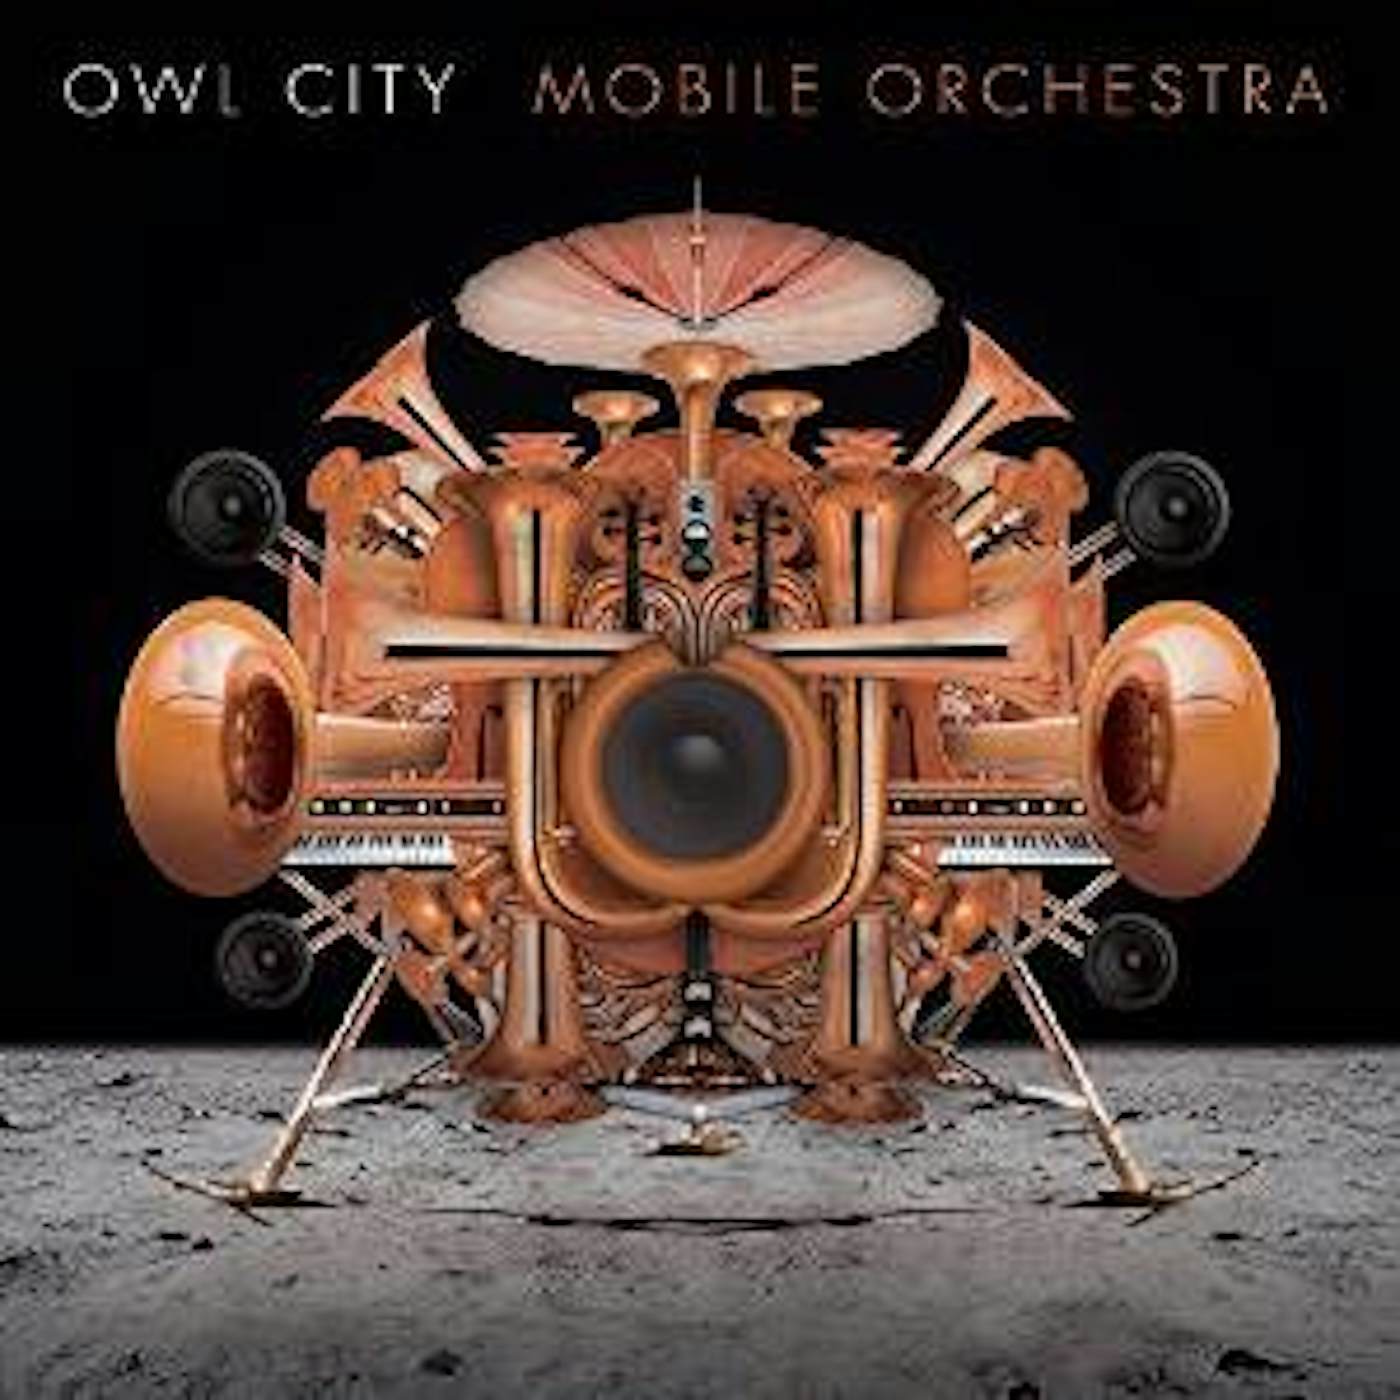 Owl City MOBILE ORCHESTRA CD